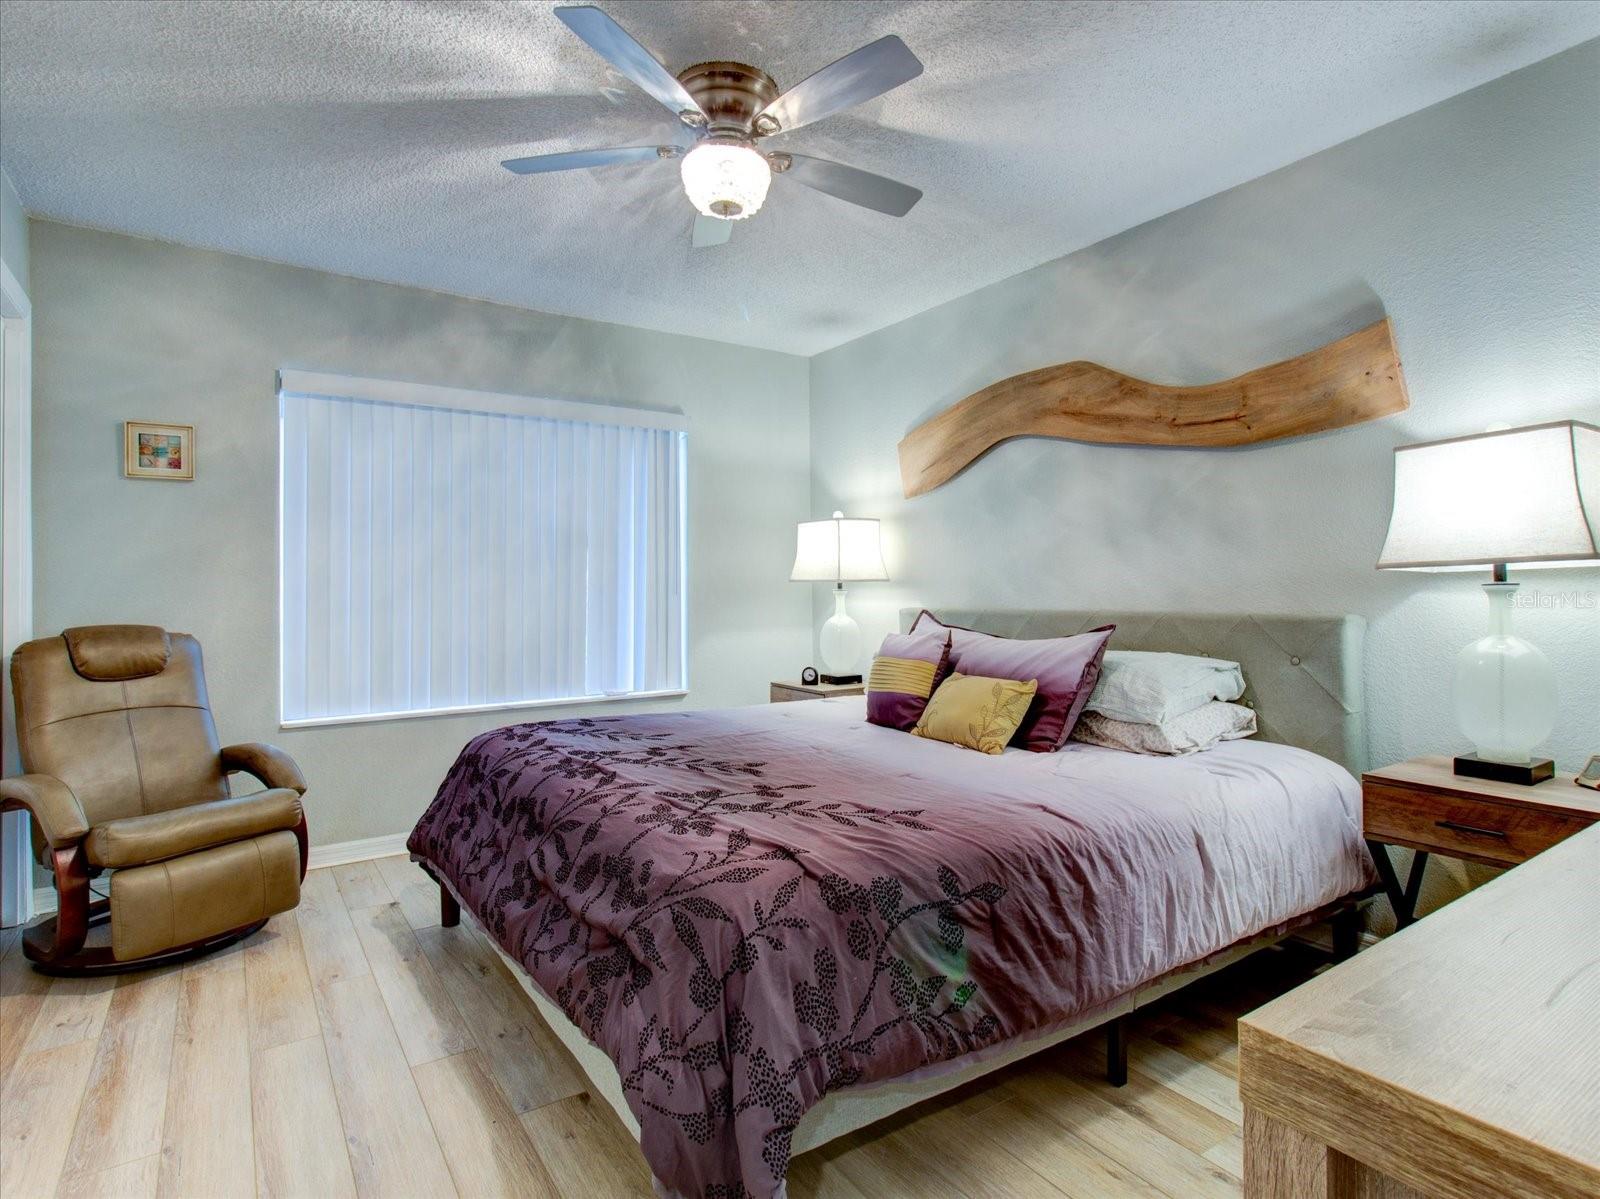 Large Bedroom That Can Easily Hold a King Size Bed With Updated Flooring and Ceiling Fan With Direct Bathroom Access 2